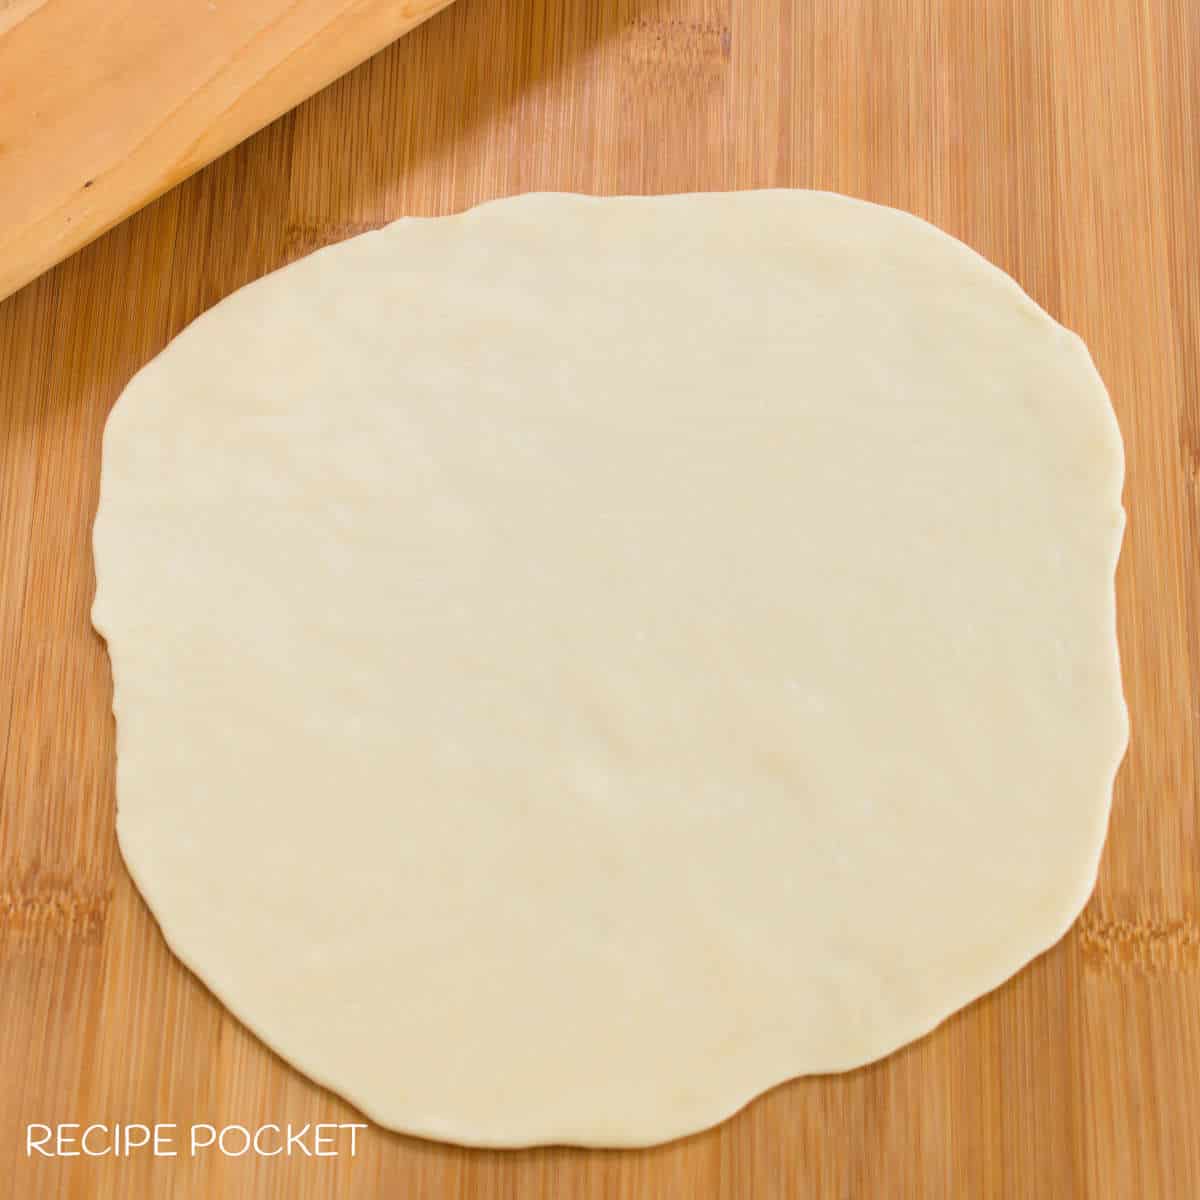 Dough rolled into a thin round shape.